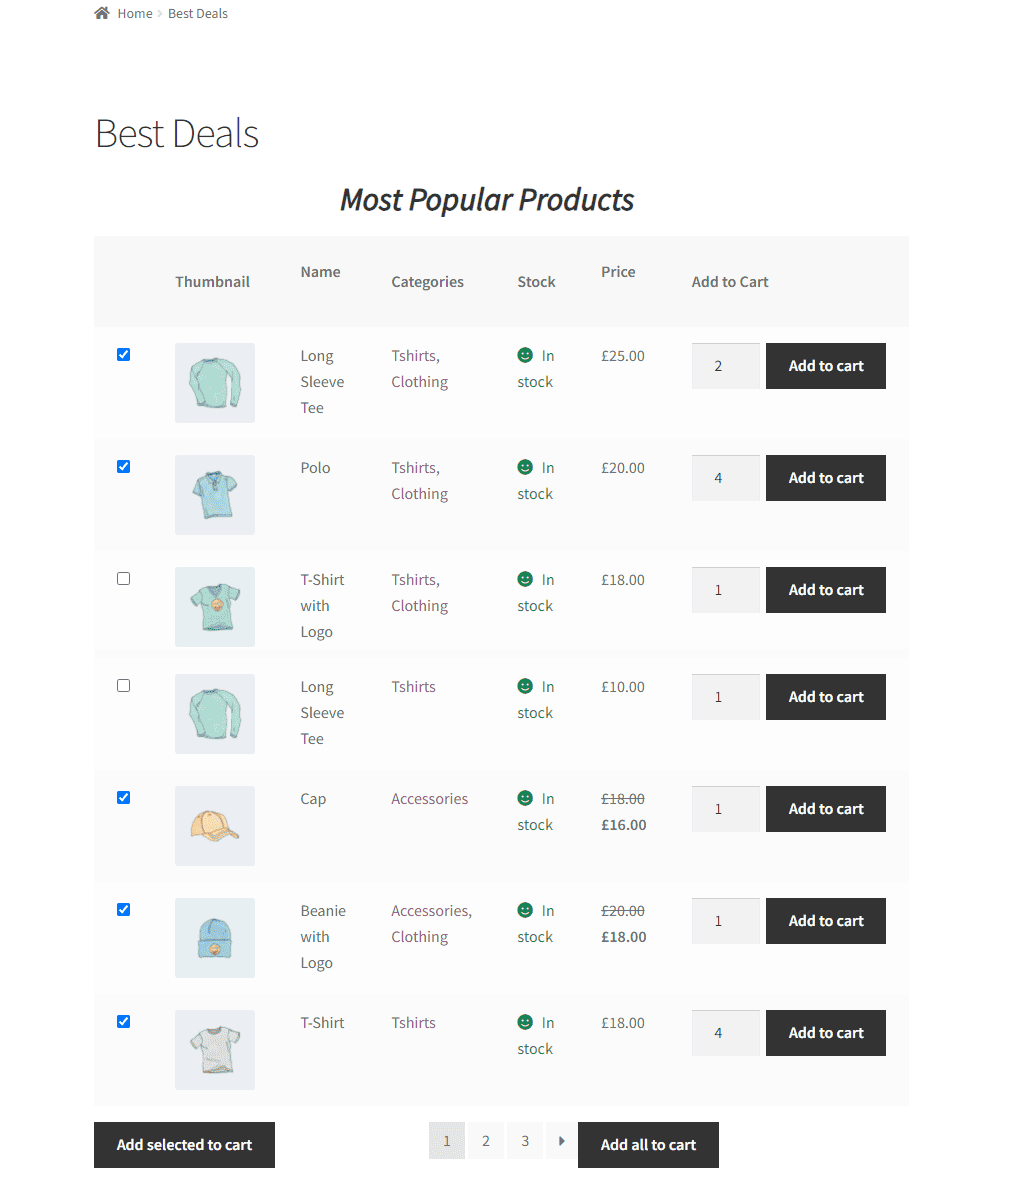 Popular products in a category